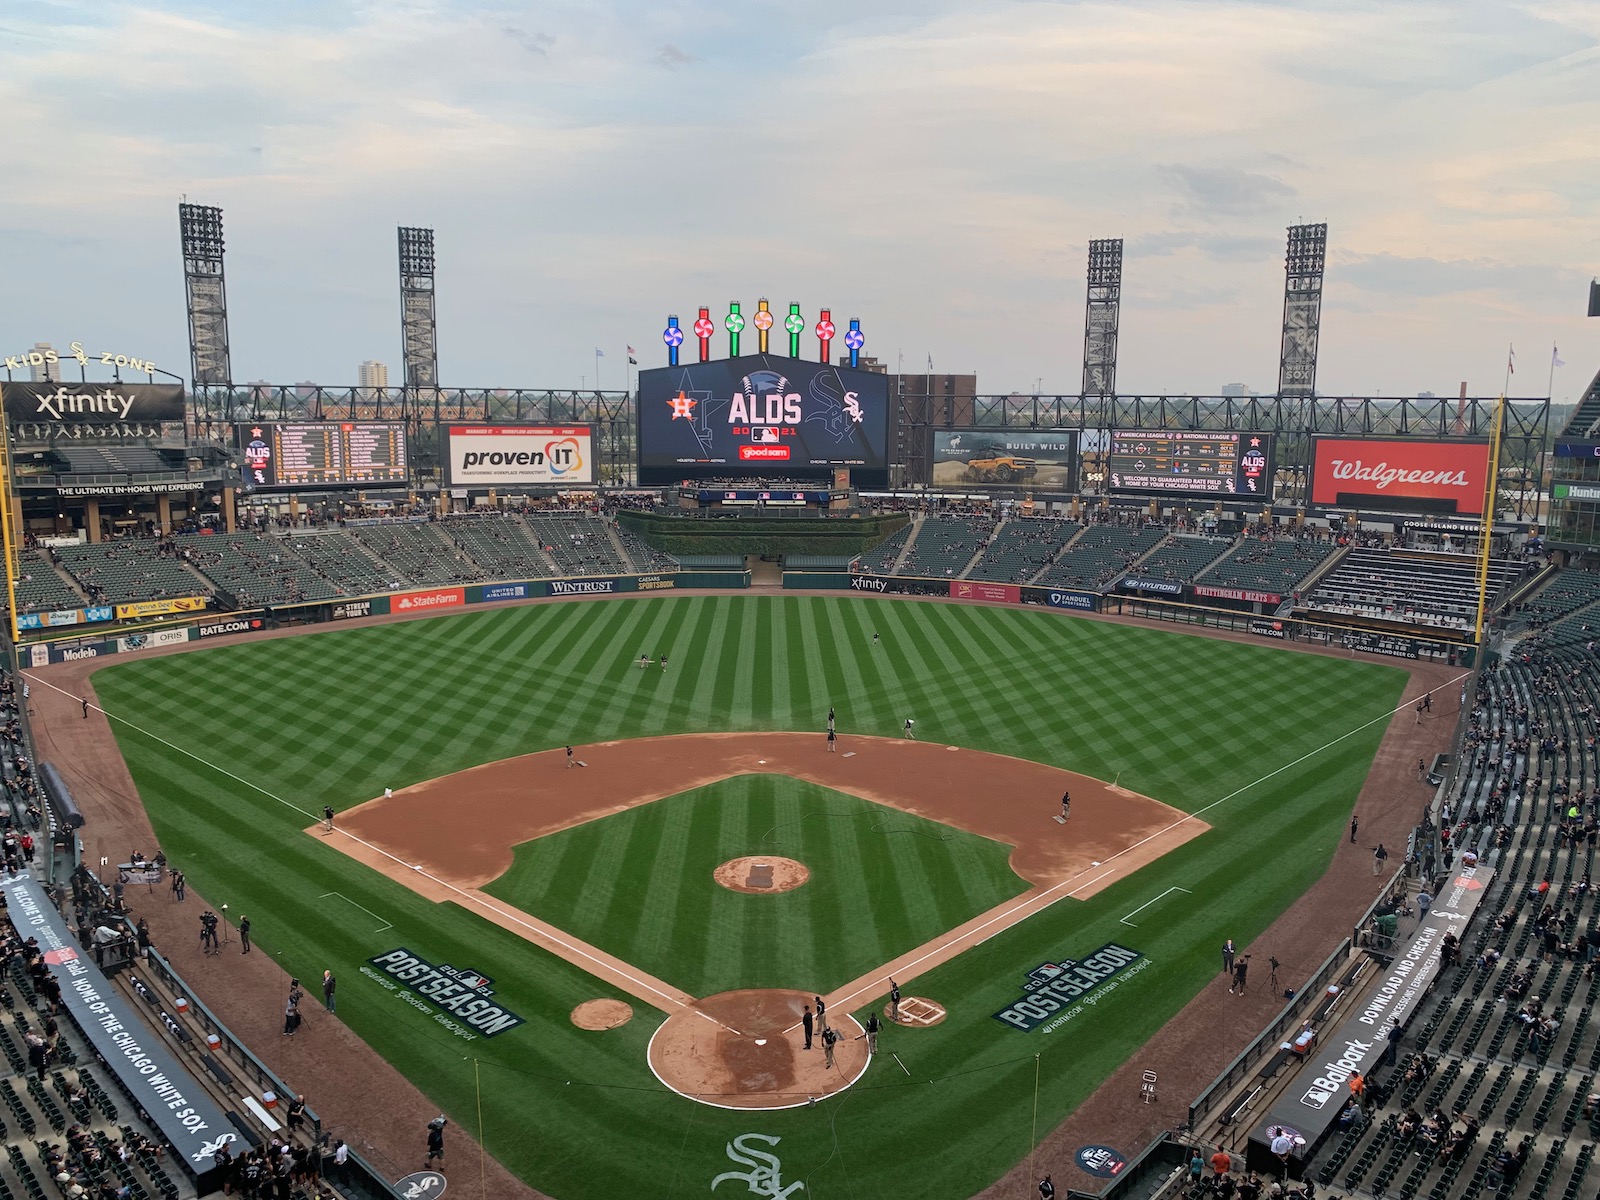 New Comiskey Park Chicago, Or A.K.A. U.S. Cellular Field it…